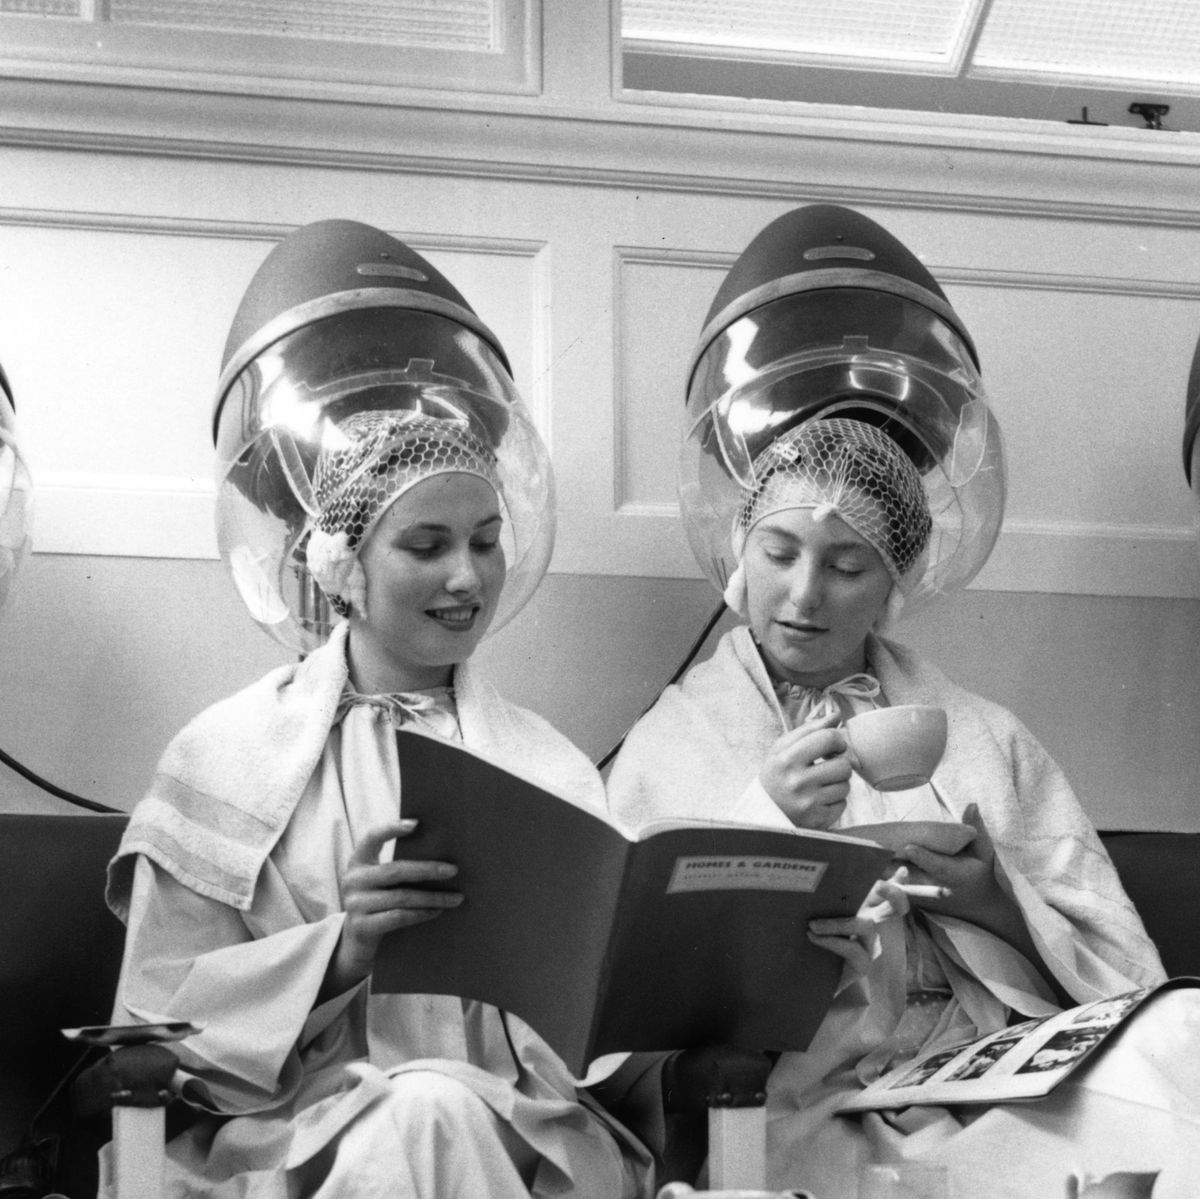 The Best Bonnet Hair Dryers for Salon-Quality Styling at Home